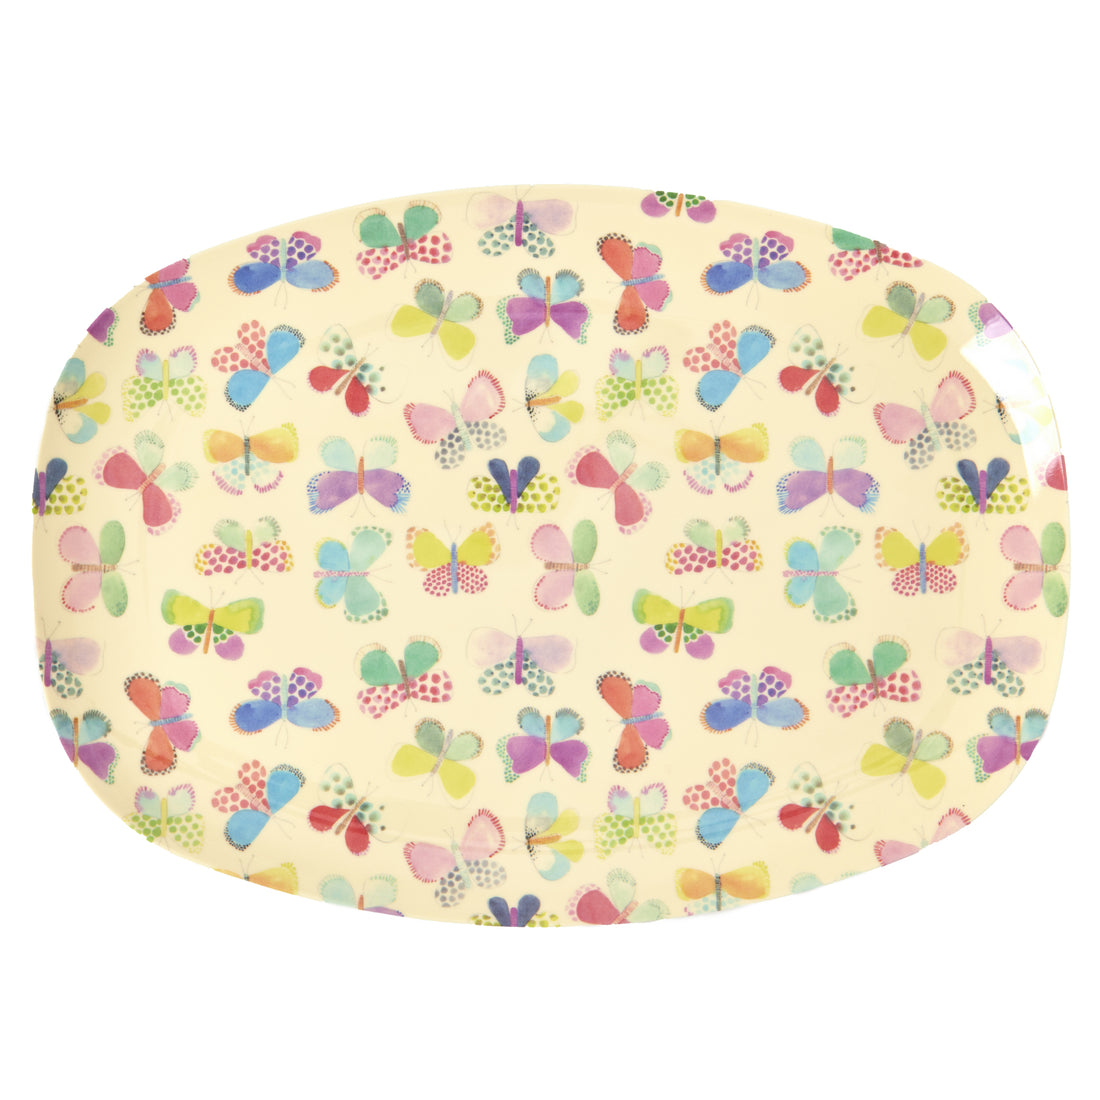 rice-dk-melamine-rectangular-plate-with-butterfly-print-rice-melpl-butf